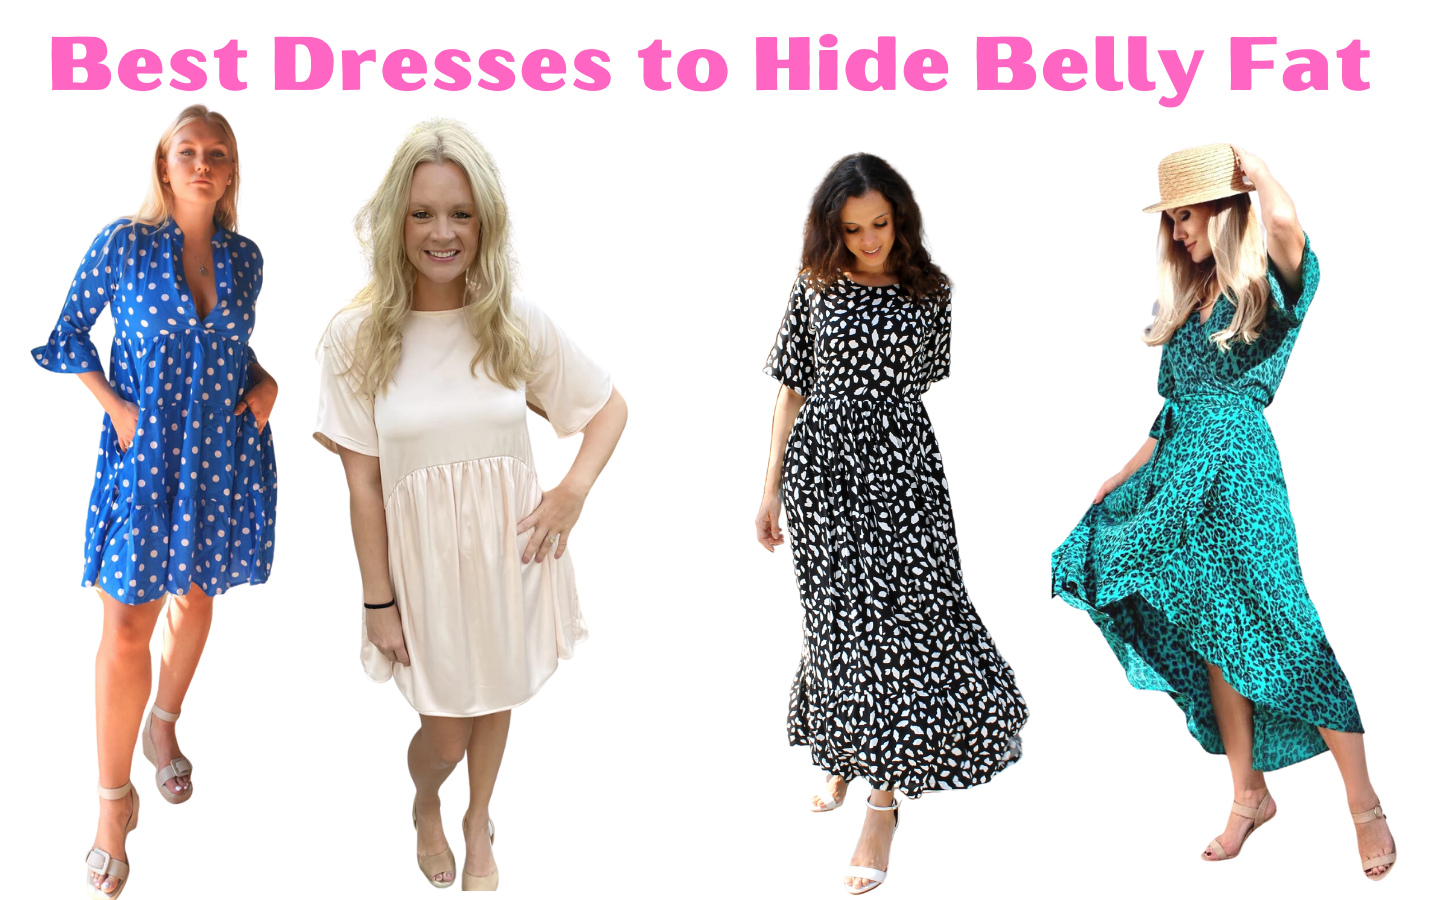 dress to disguise belly